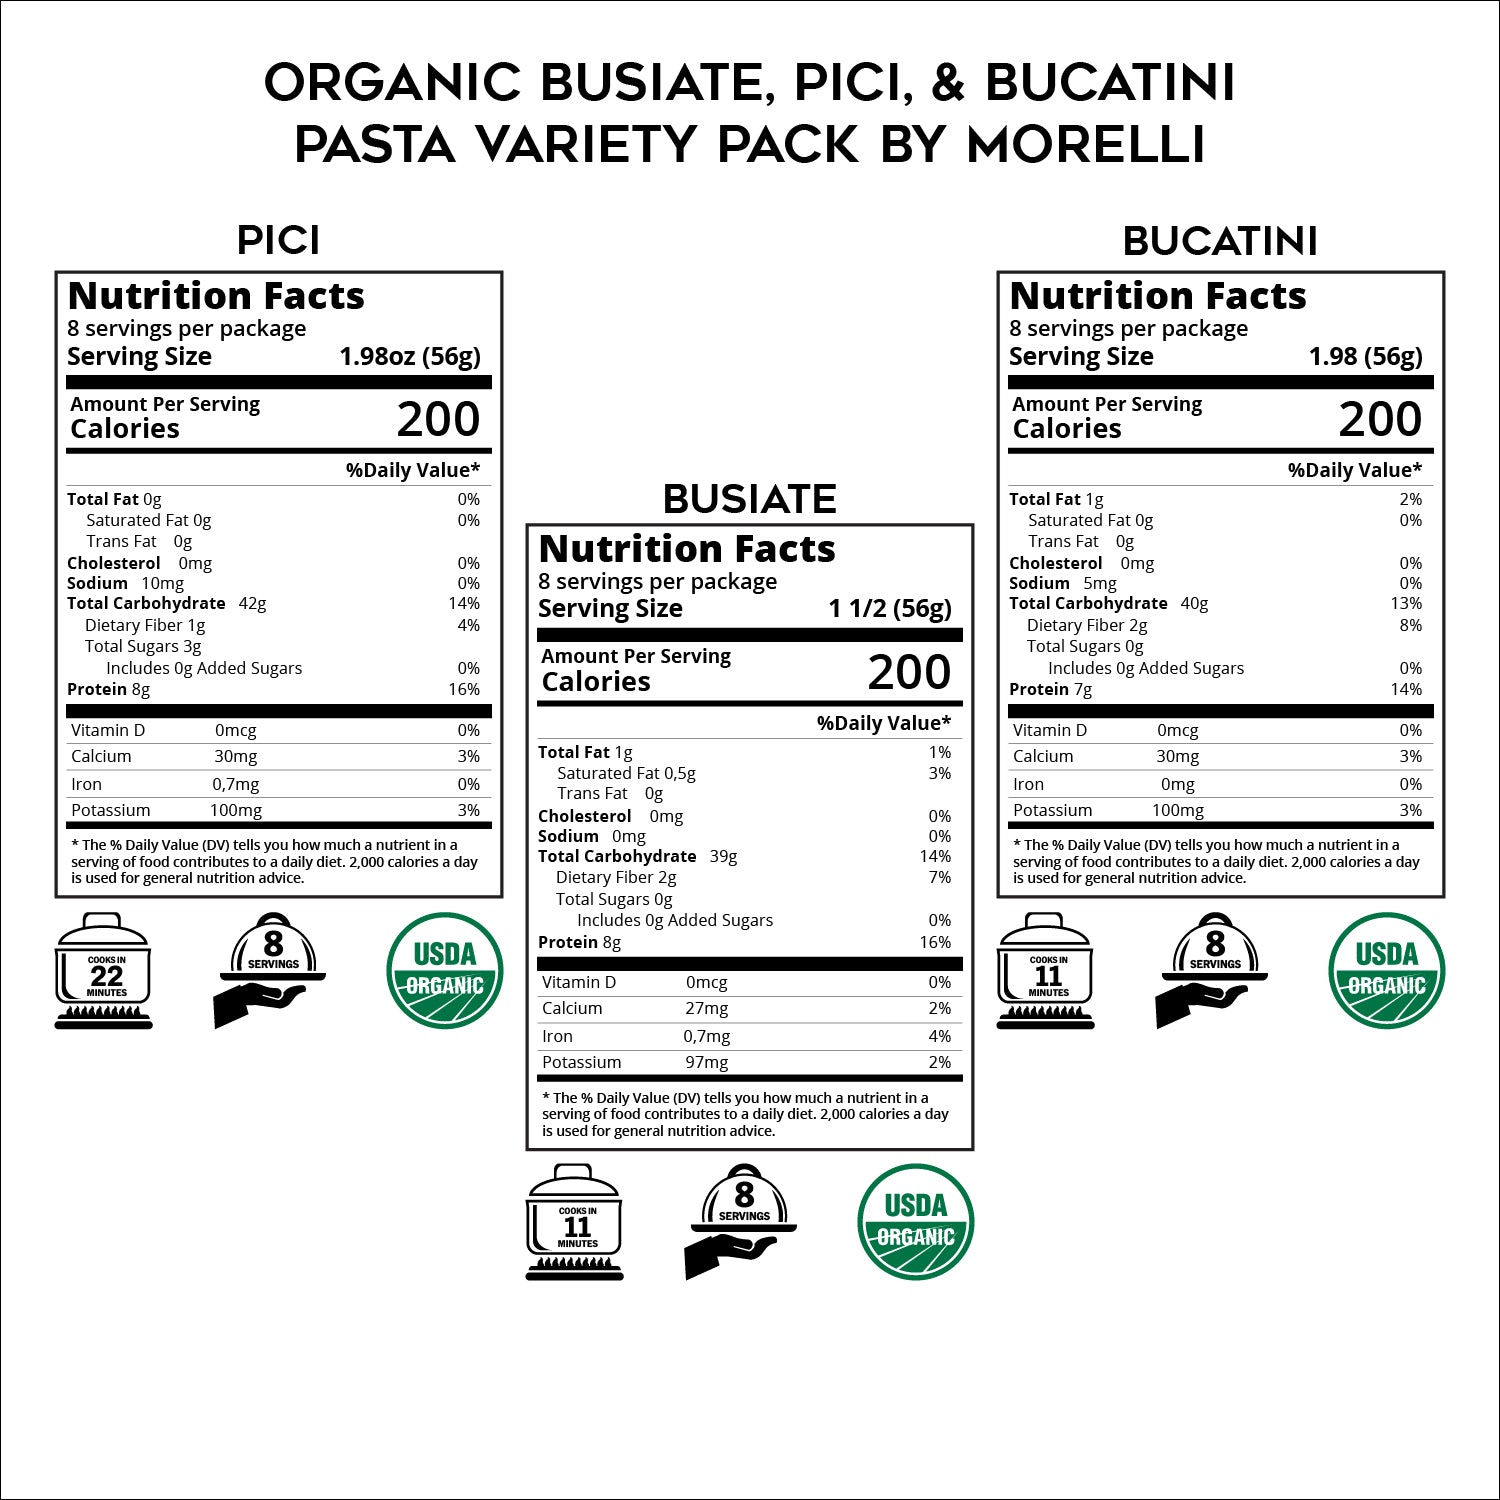 Organic Busiate, Pici, & Bucatini - Pasta Variety Pack by Morelli